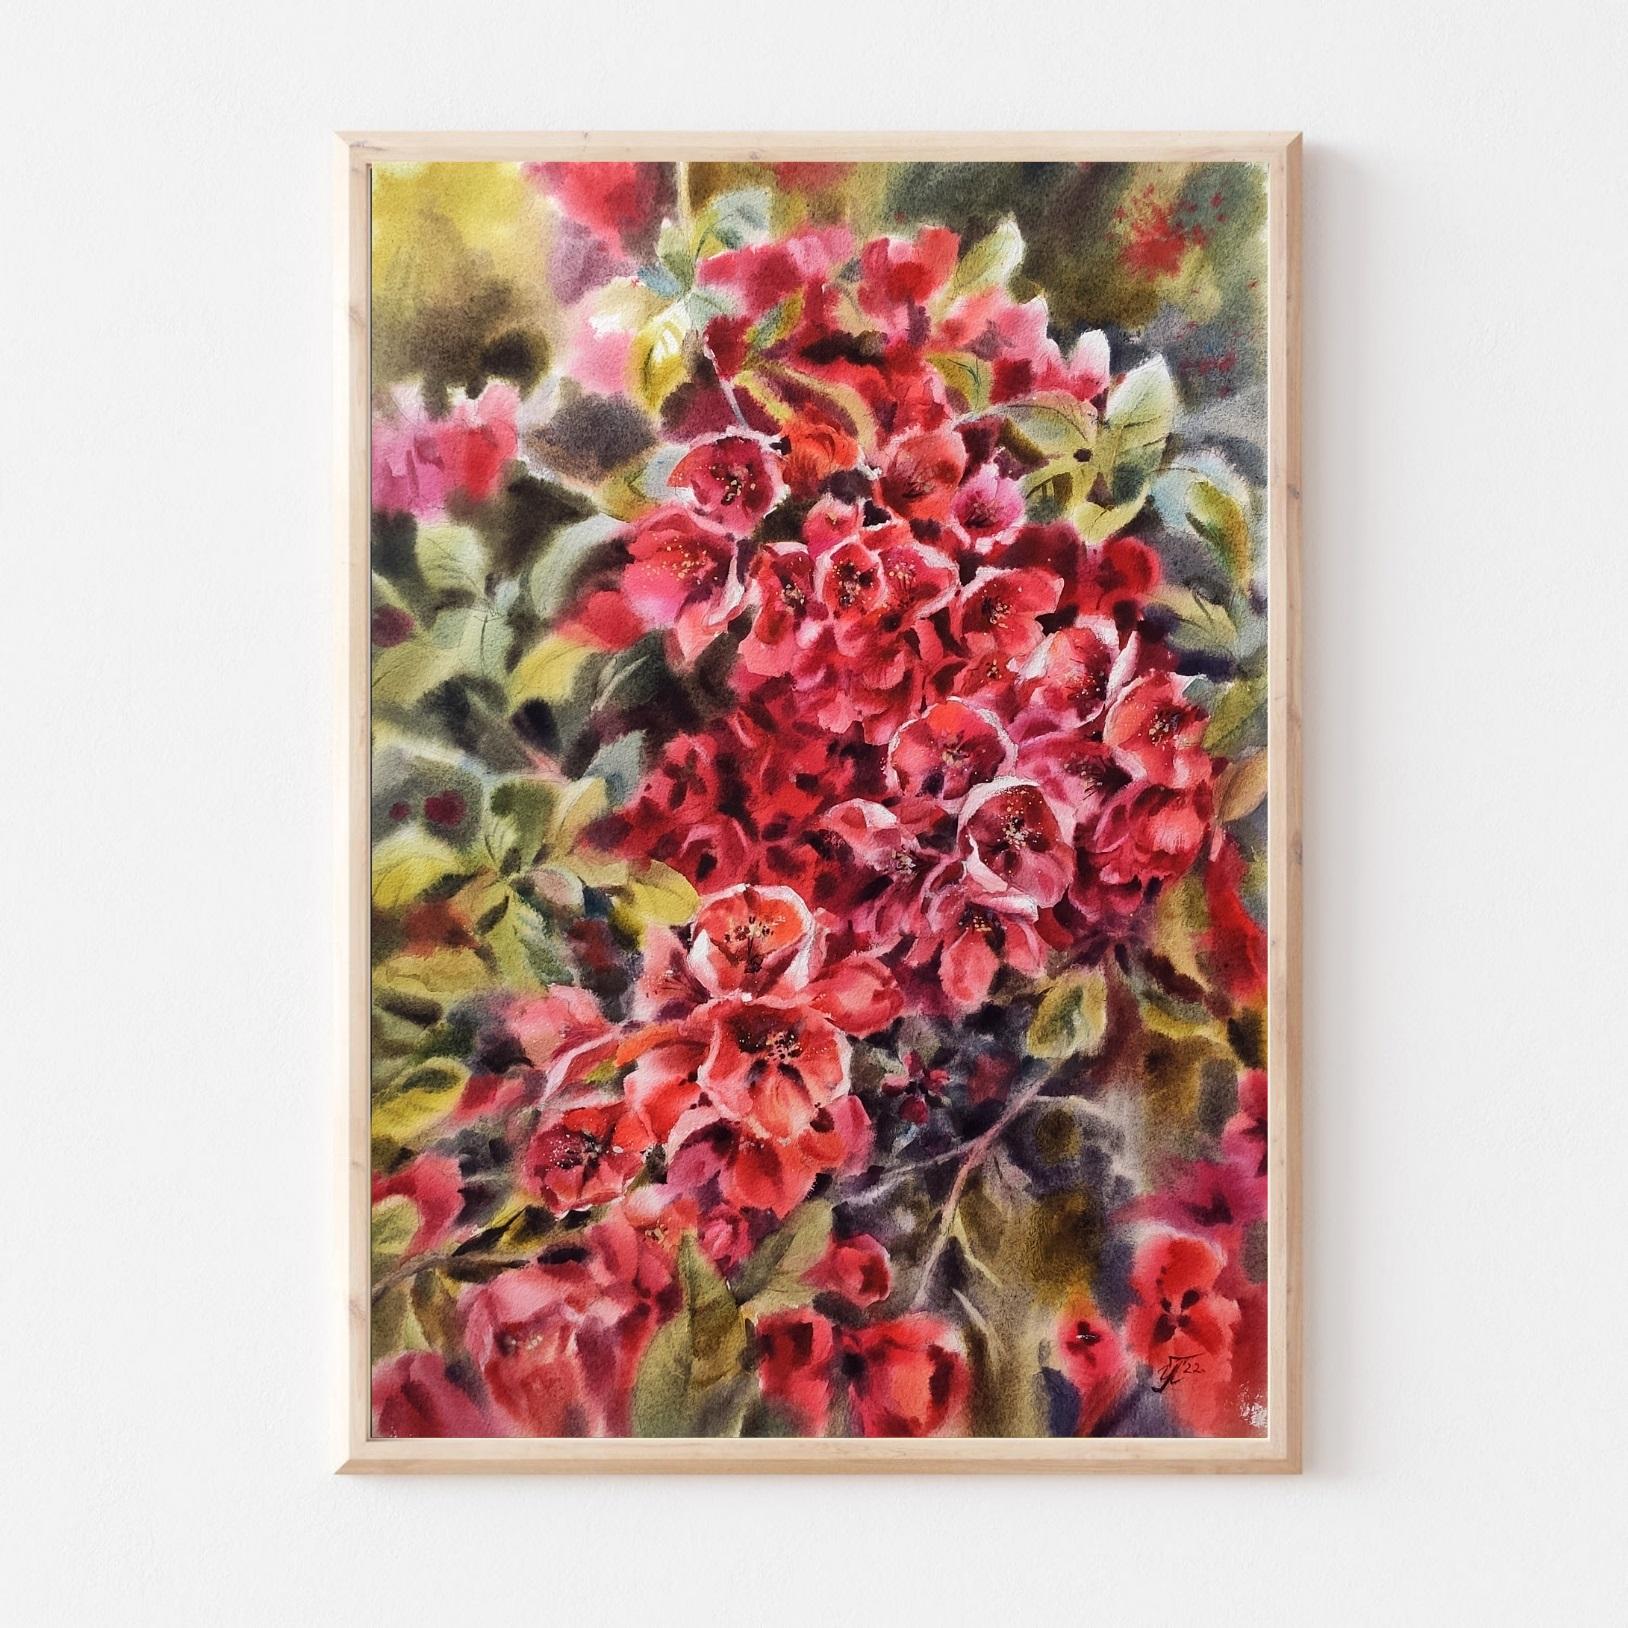 Painting in red and green colors. Painting for a green wall. Painting for a green interior. Green and red painting for living room. Painting for a classic style.

Watercolor painting with bright quince flowers. The quince branches blooming with